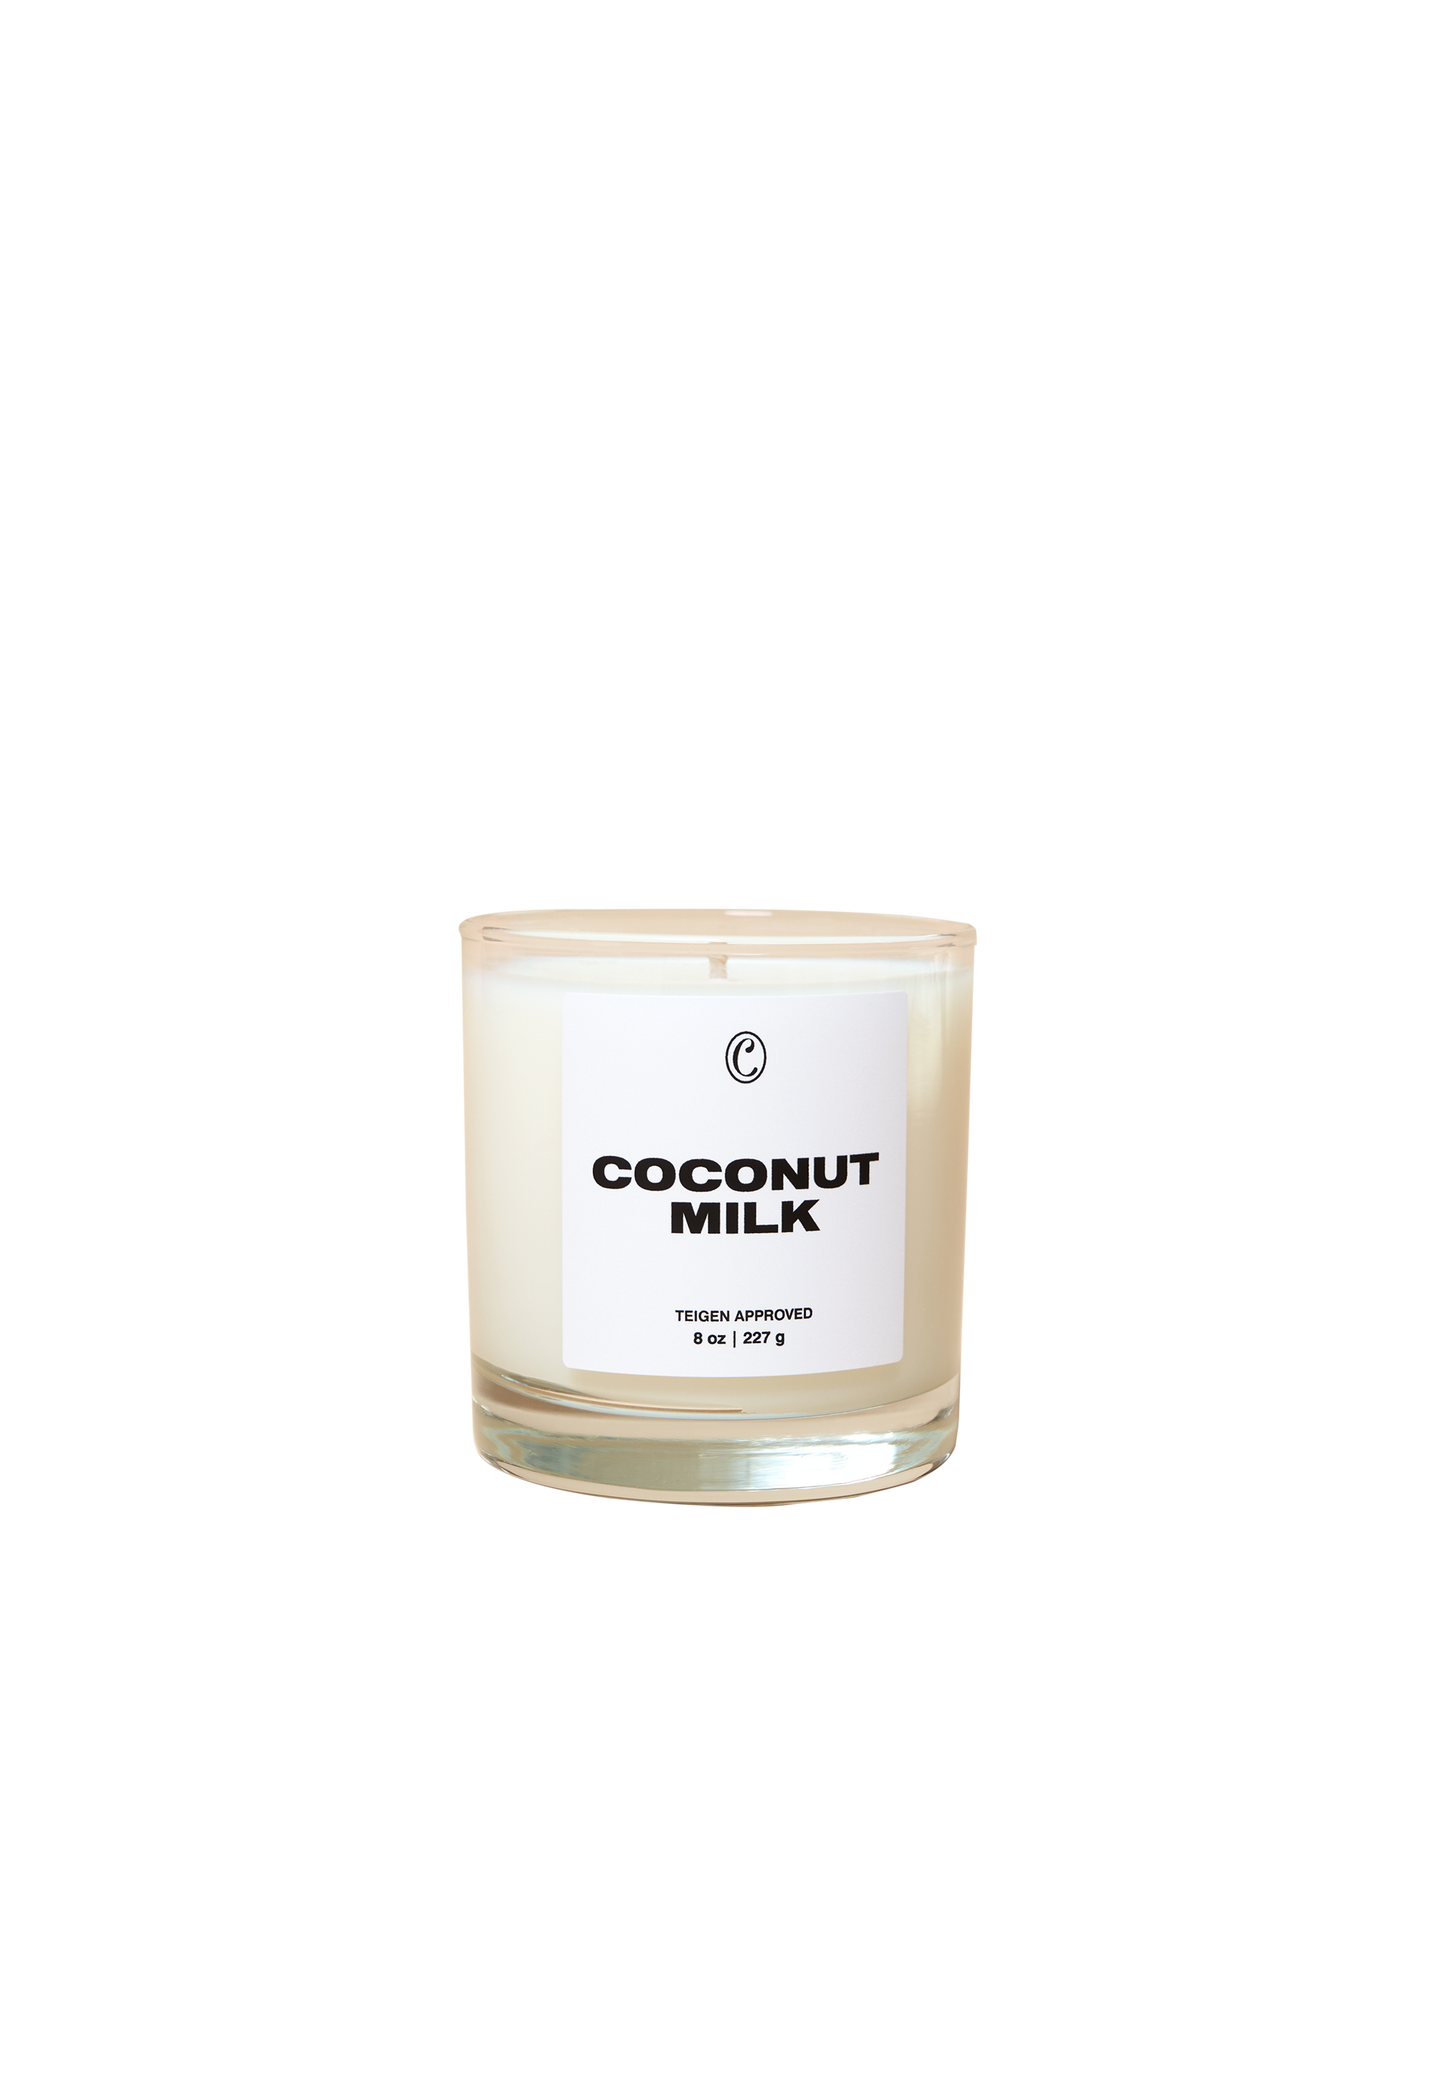 Cravings by Chrissy Teigen: Simmer Down Scented Candle in Coconut Milk